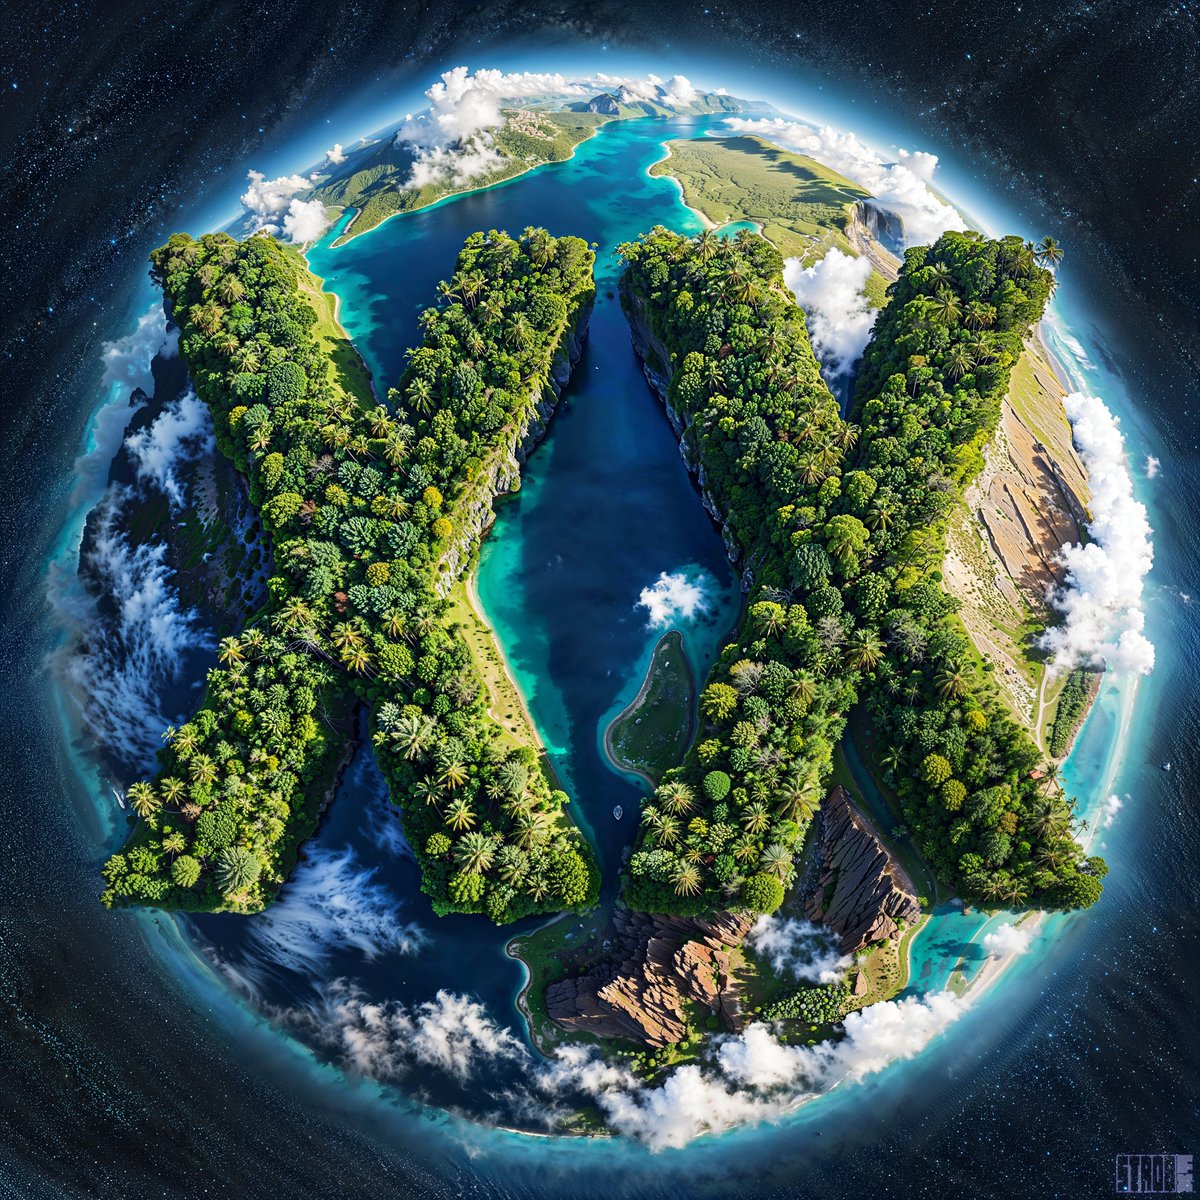 This coming Earth Day (April 22) choose the most sustainable, ecological and equitable crypto! #XXcoin